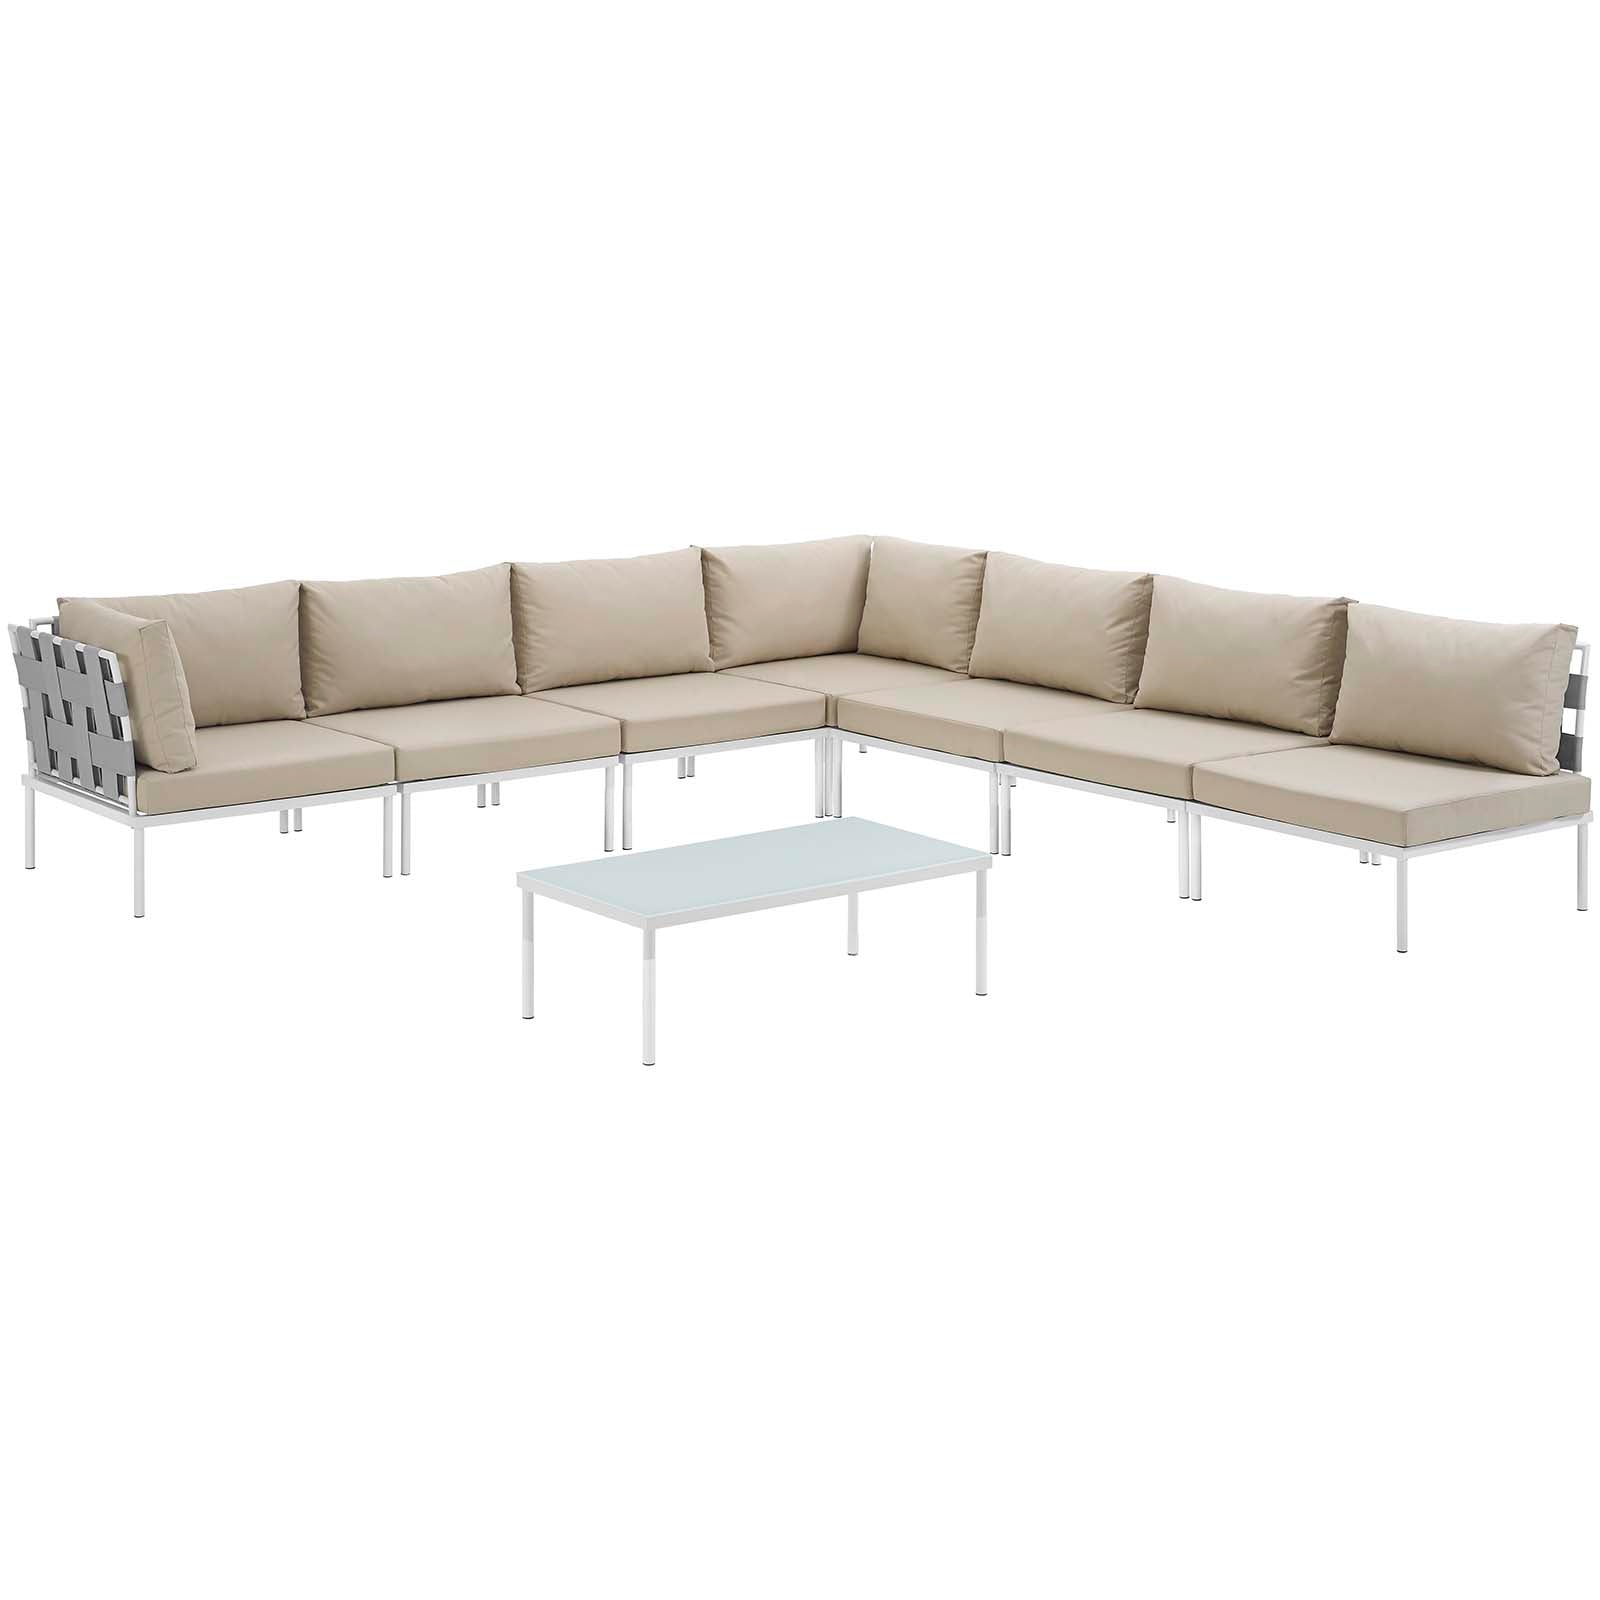 Modway Outdoor Conversation Sets - Harmony 8 Piece Outdoor 165"W Patio Aluminum Sectional Sofa Set Whit